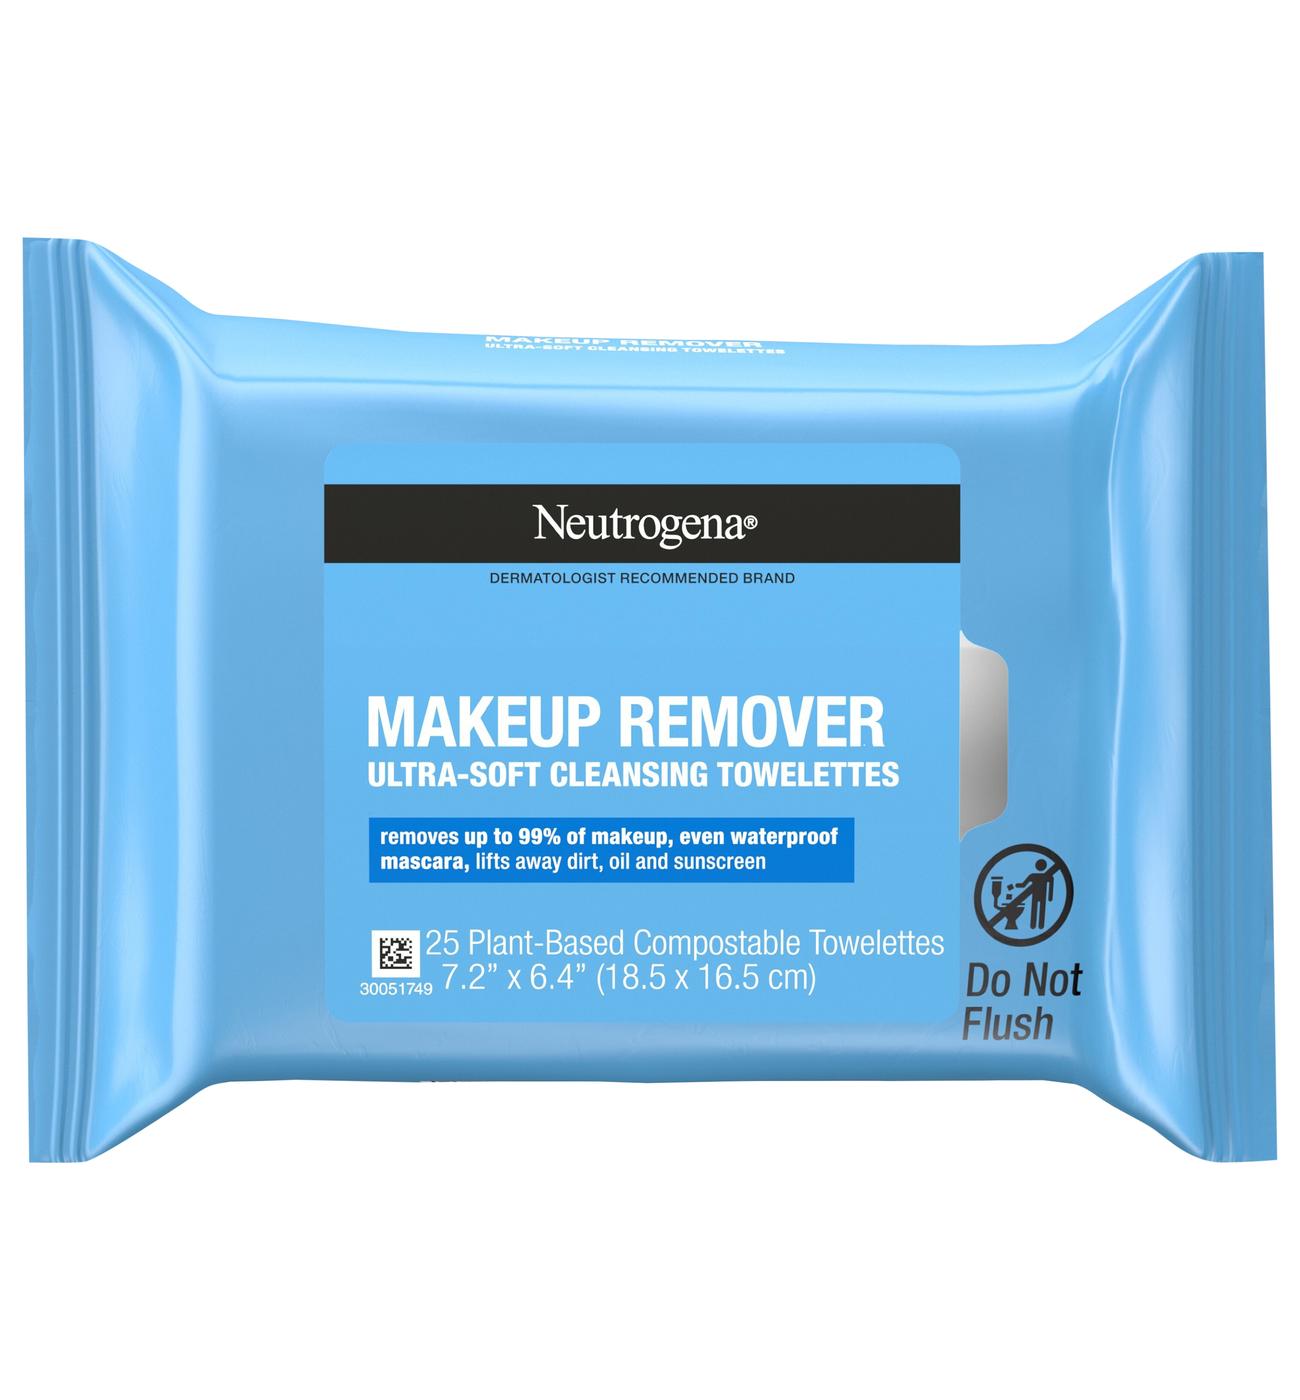 Neutrogena Makeup Remover Cleansing Towelettes; image 1 of 8